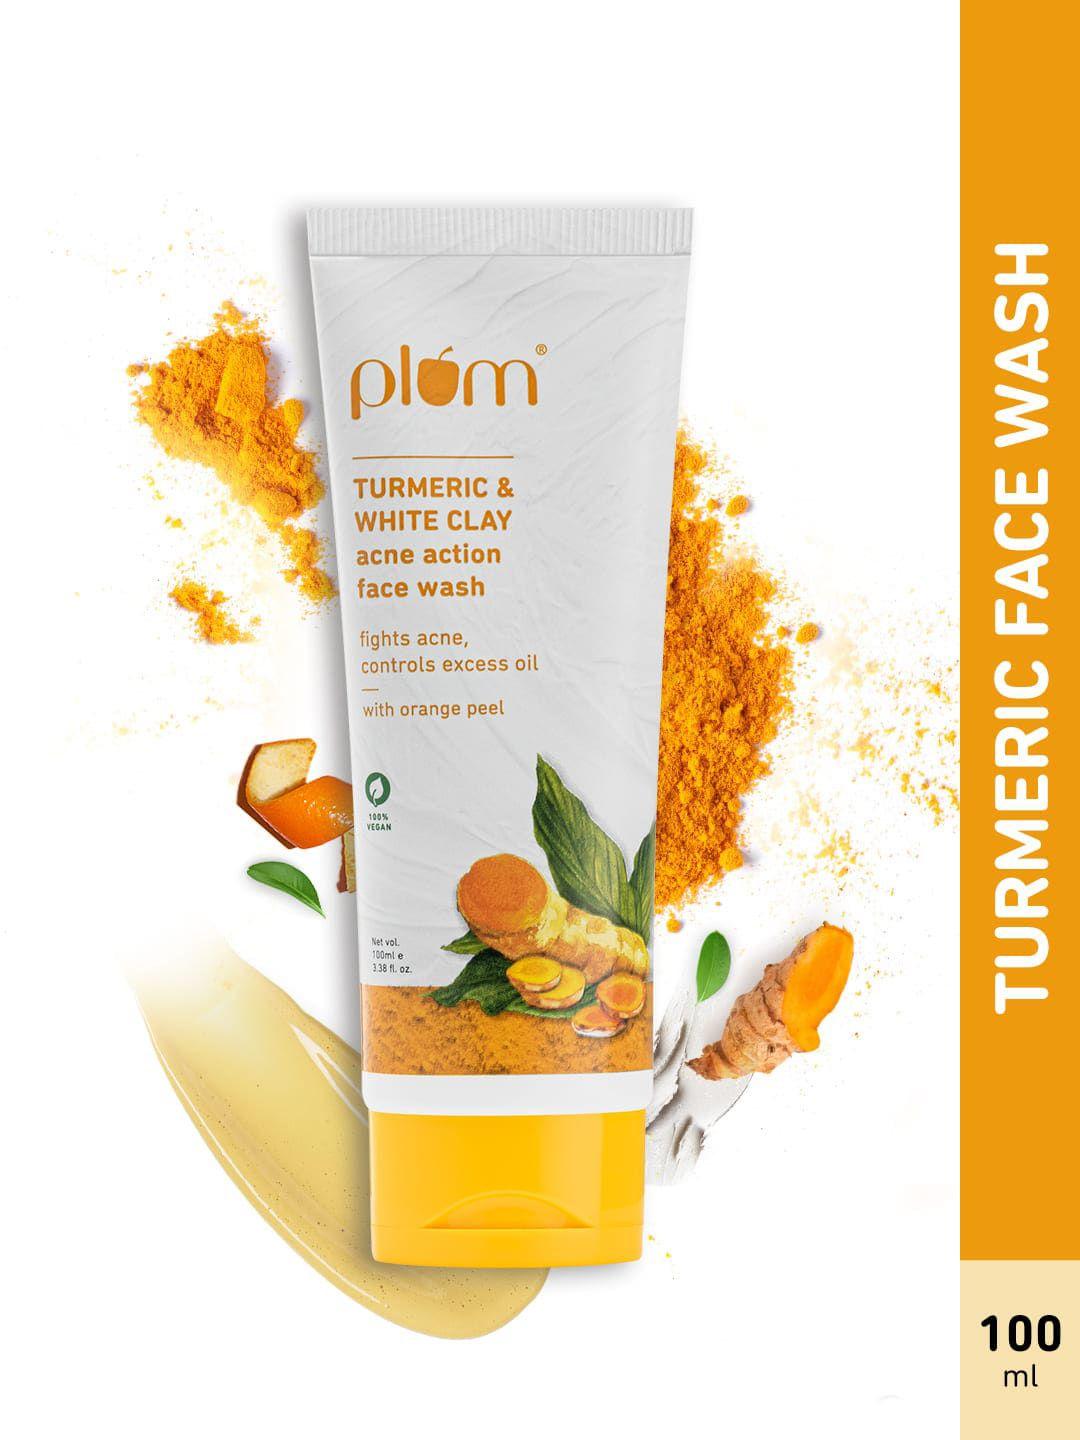 plum-turmeric-&-white-clay-acne-action-face-wash--100ml